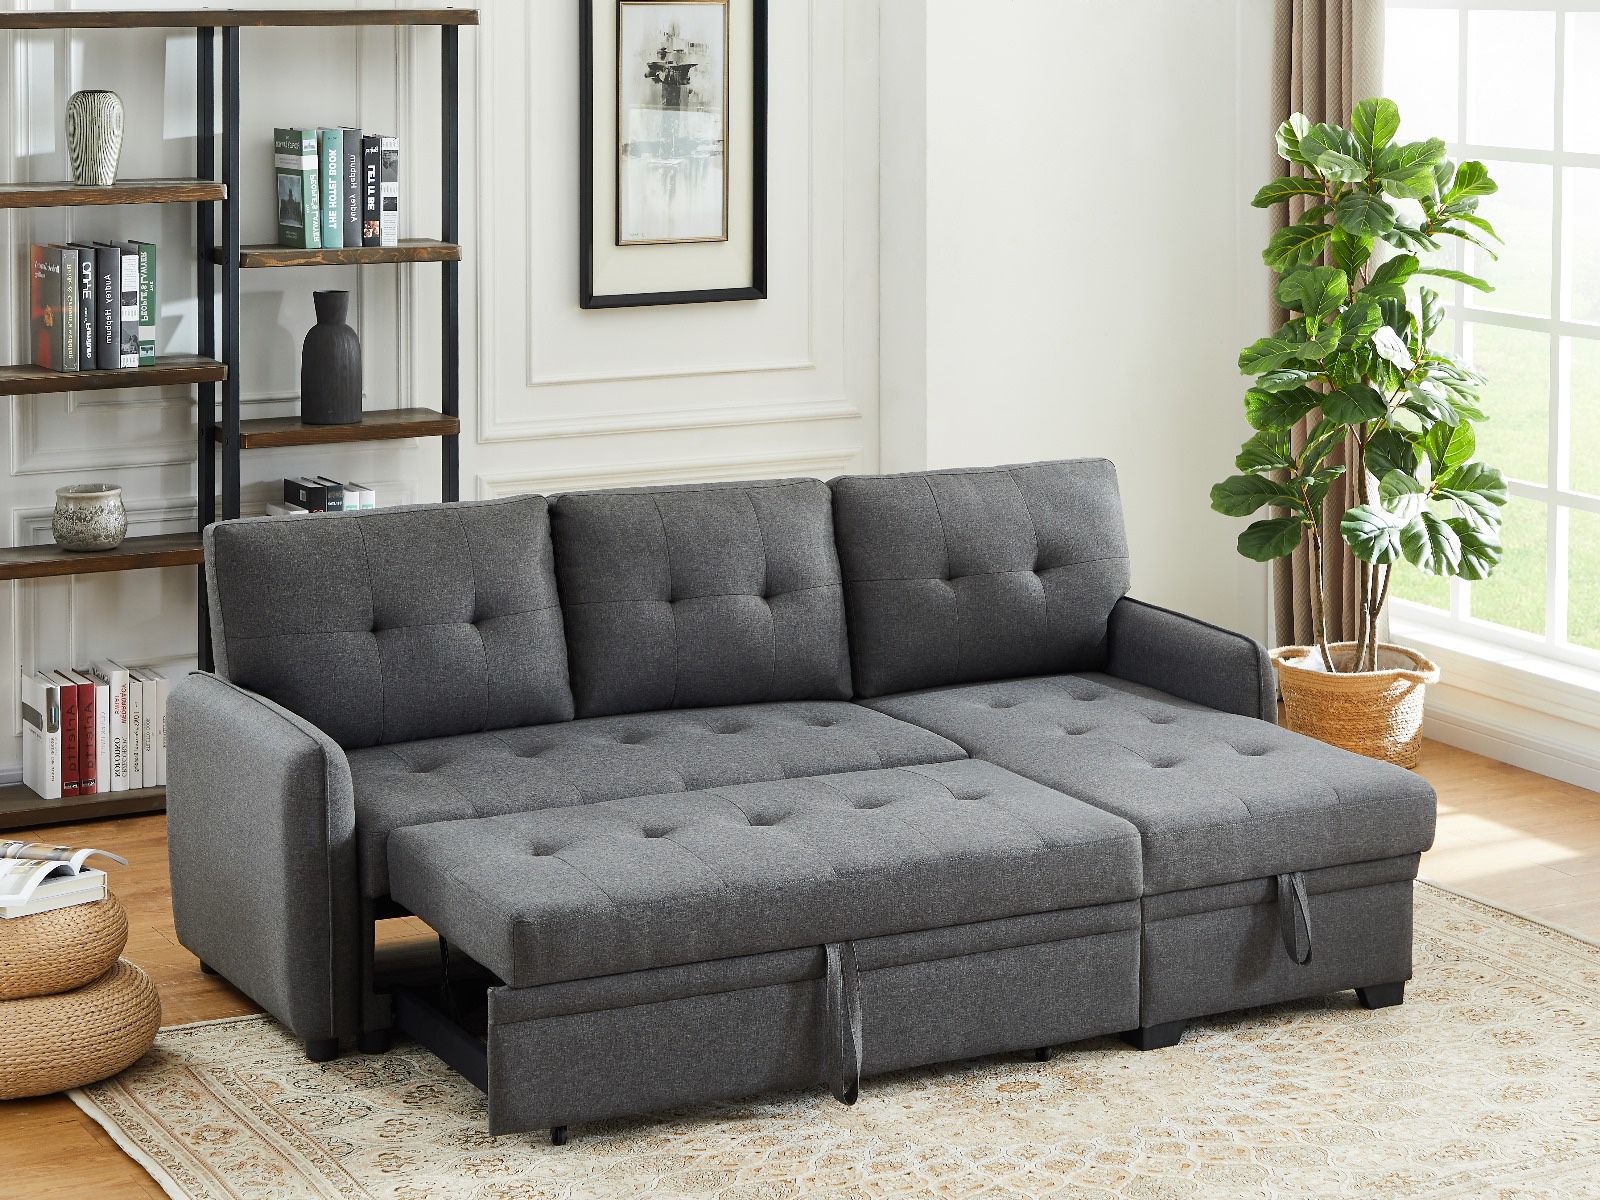 New! Reversible Chaise Sectional, Sectional, Sectionals, Sofa, Couch, Sectional Sofa Bed, Sectional Sofa With Pull Out Bed, Gray Sectional